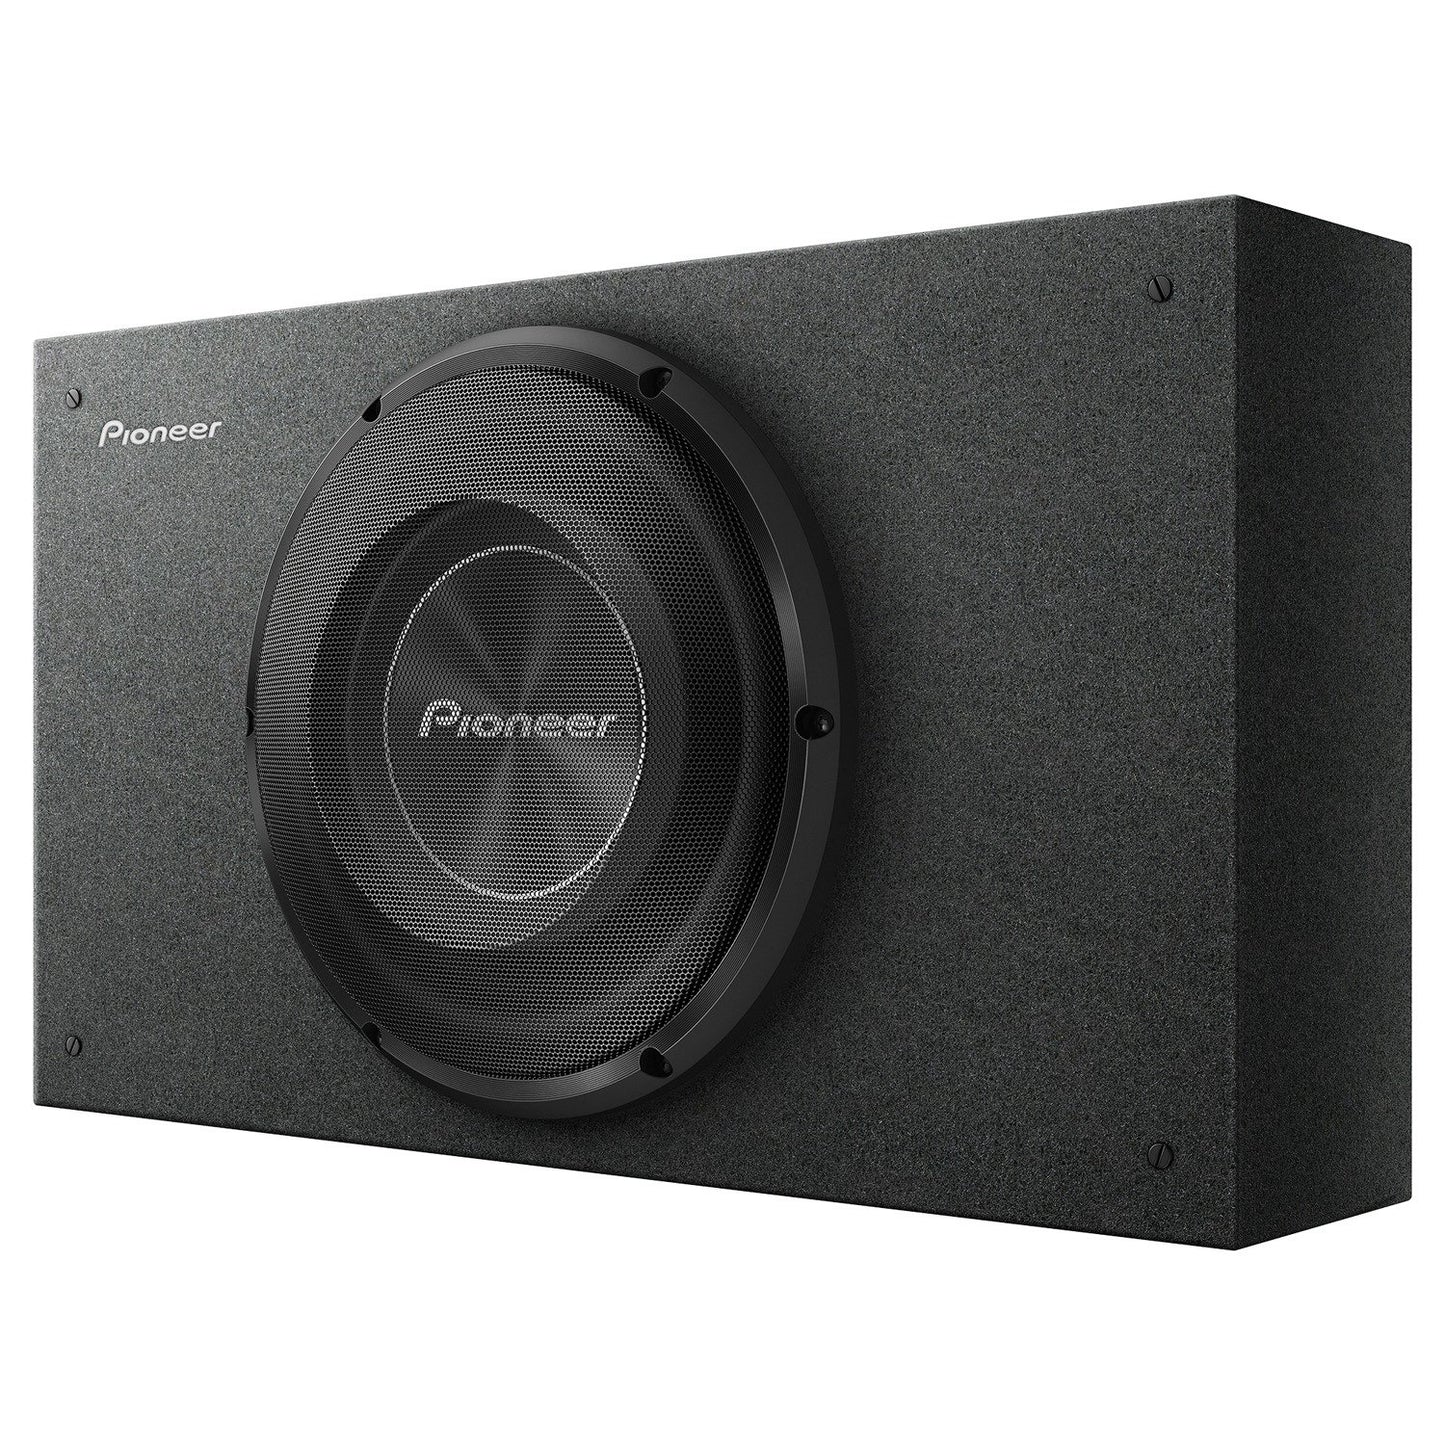 Pioneer TS-A2500LB A-Series Shallow-Mount Pre-Loaded Enclosure (10" Subwoofer)